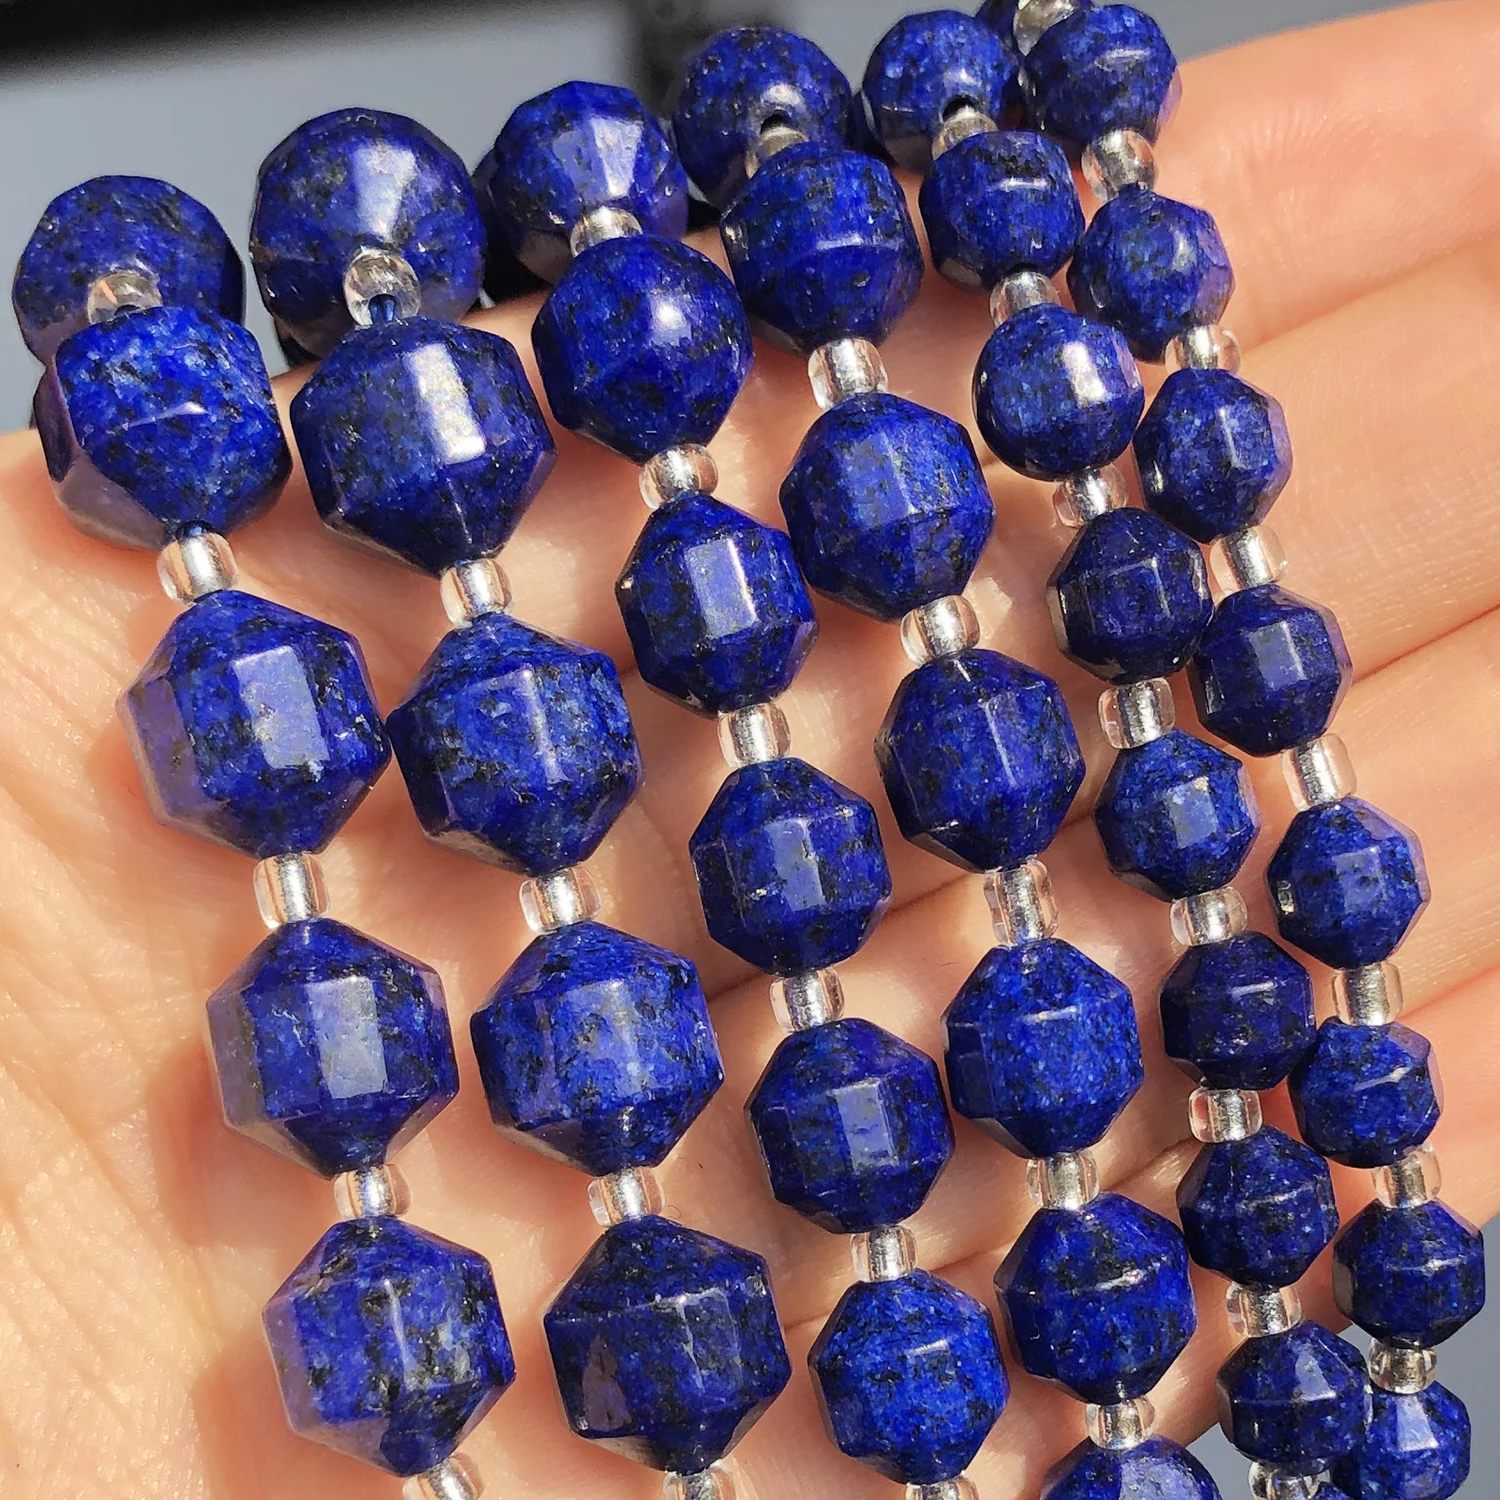 

Natural Faceted Stone Olive Shape AB Lapis Lazuli Loose Minerals Beads for DIY Jewelry Making Bracelet Accessories 15'' 6 8 10mm